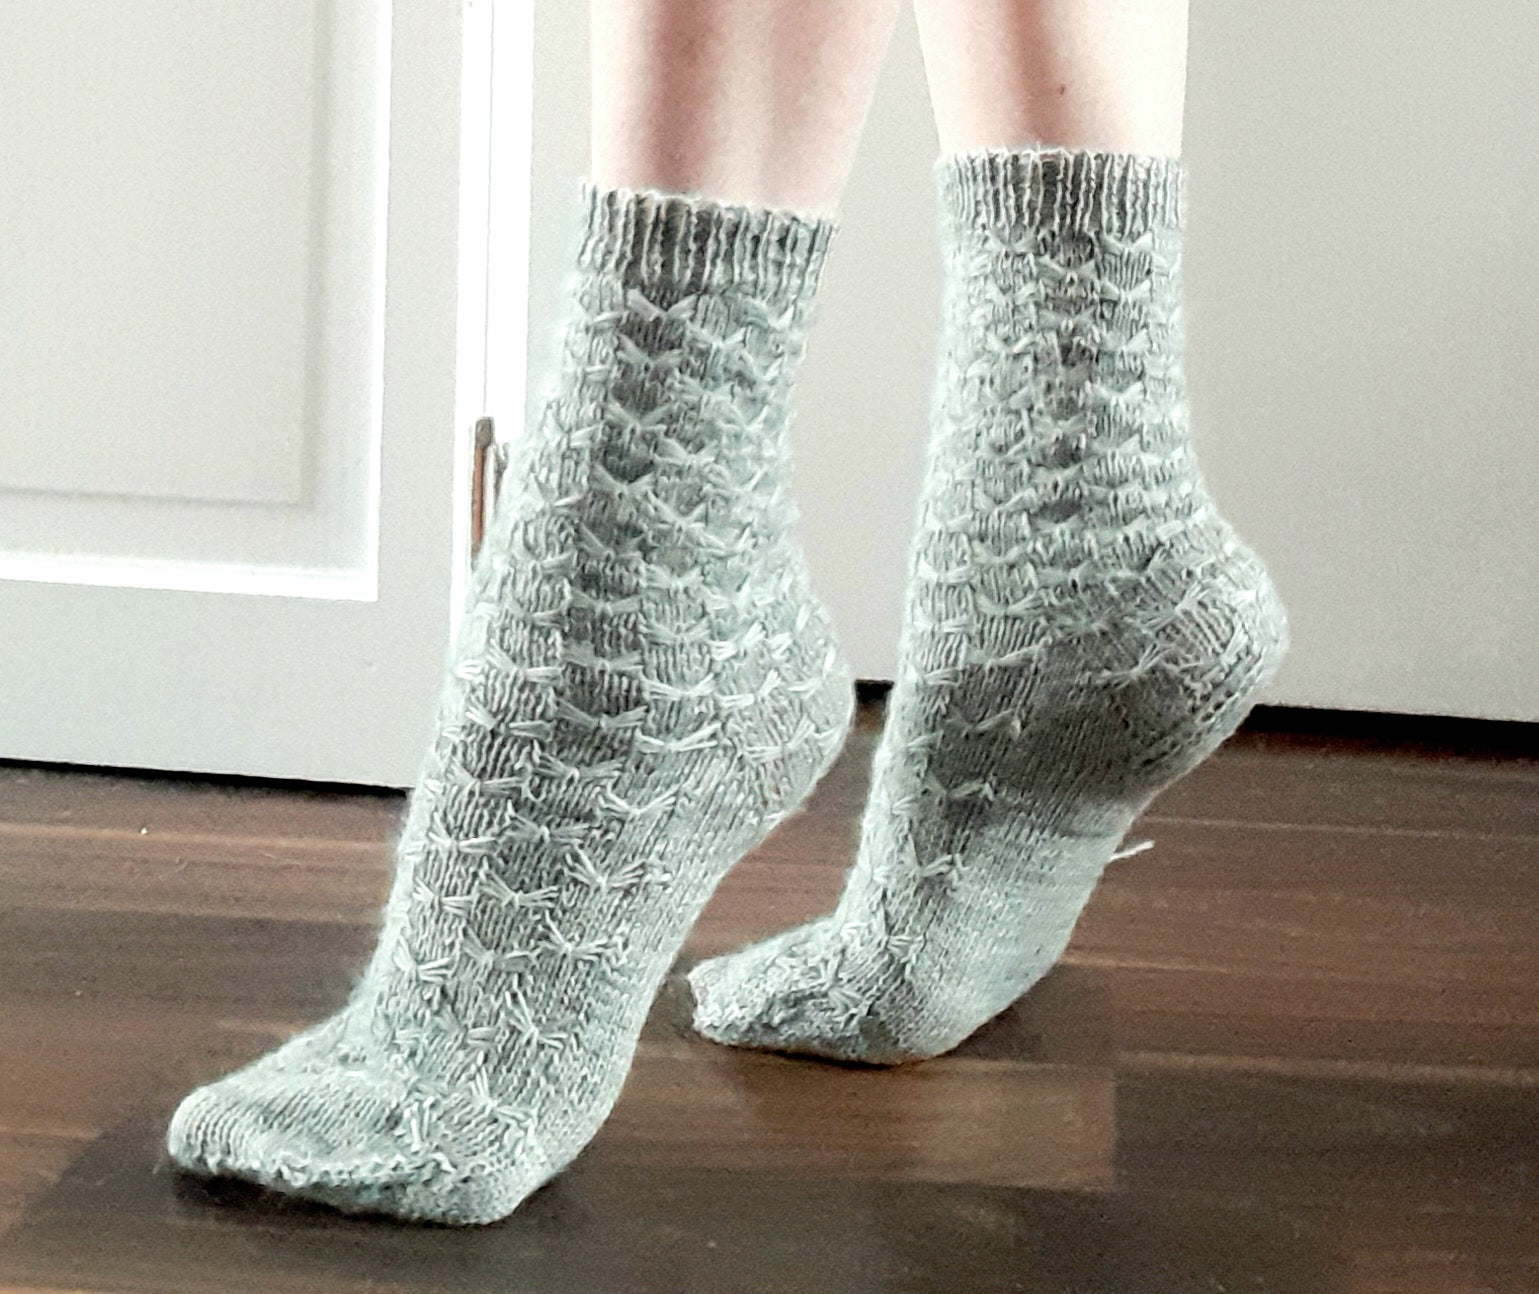 textured sock knitting pattern. 4ply sock pattern. Socks with a square heel